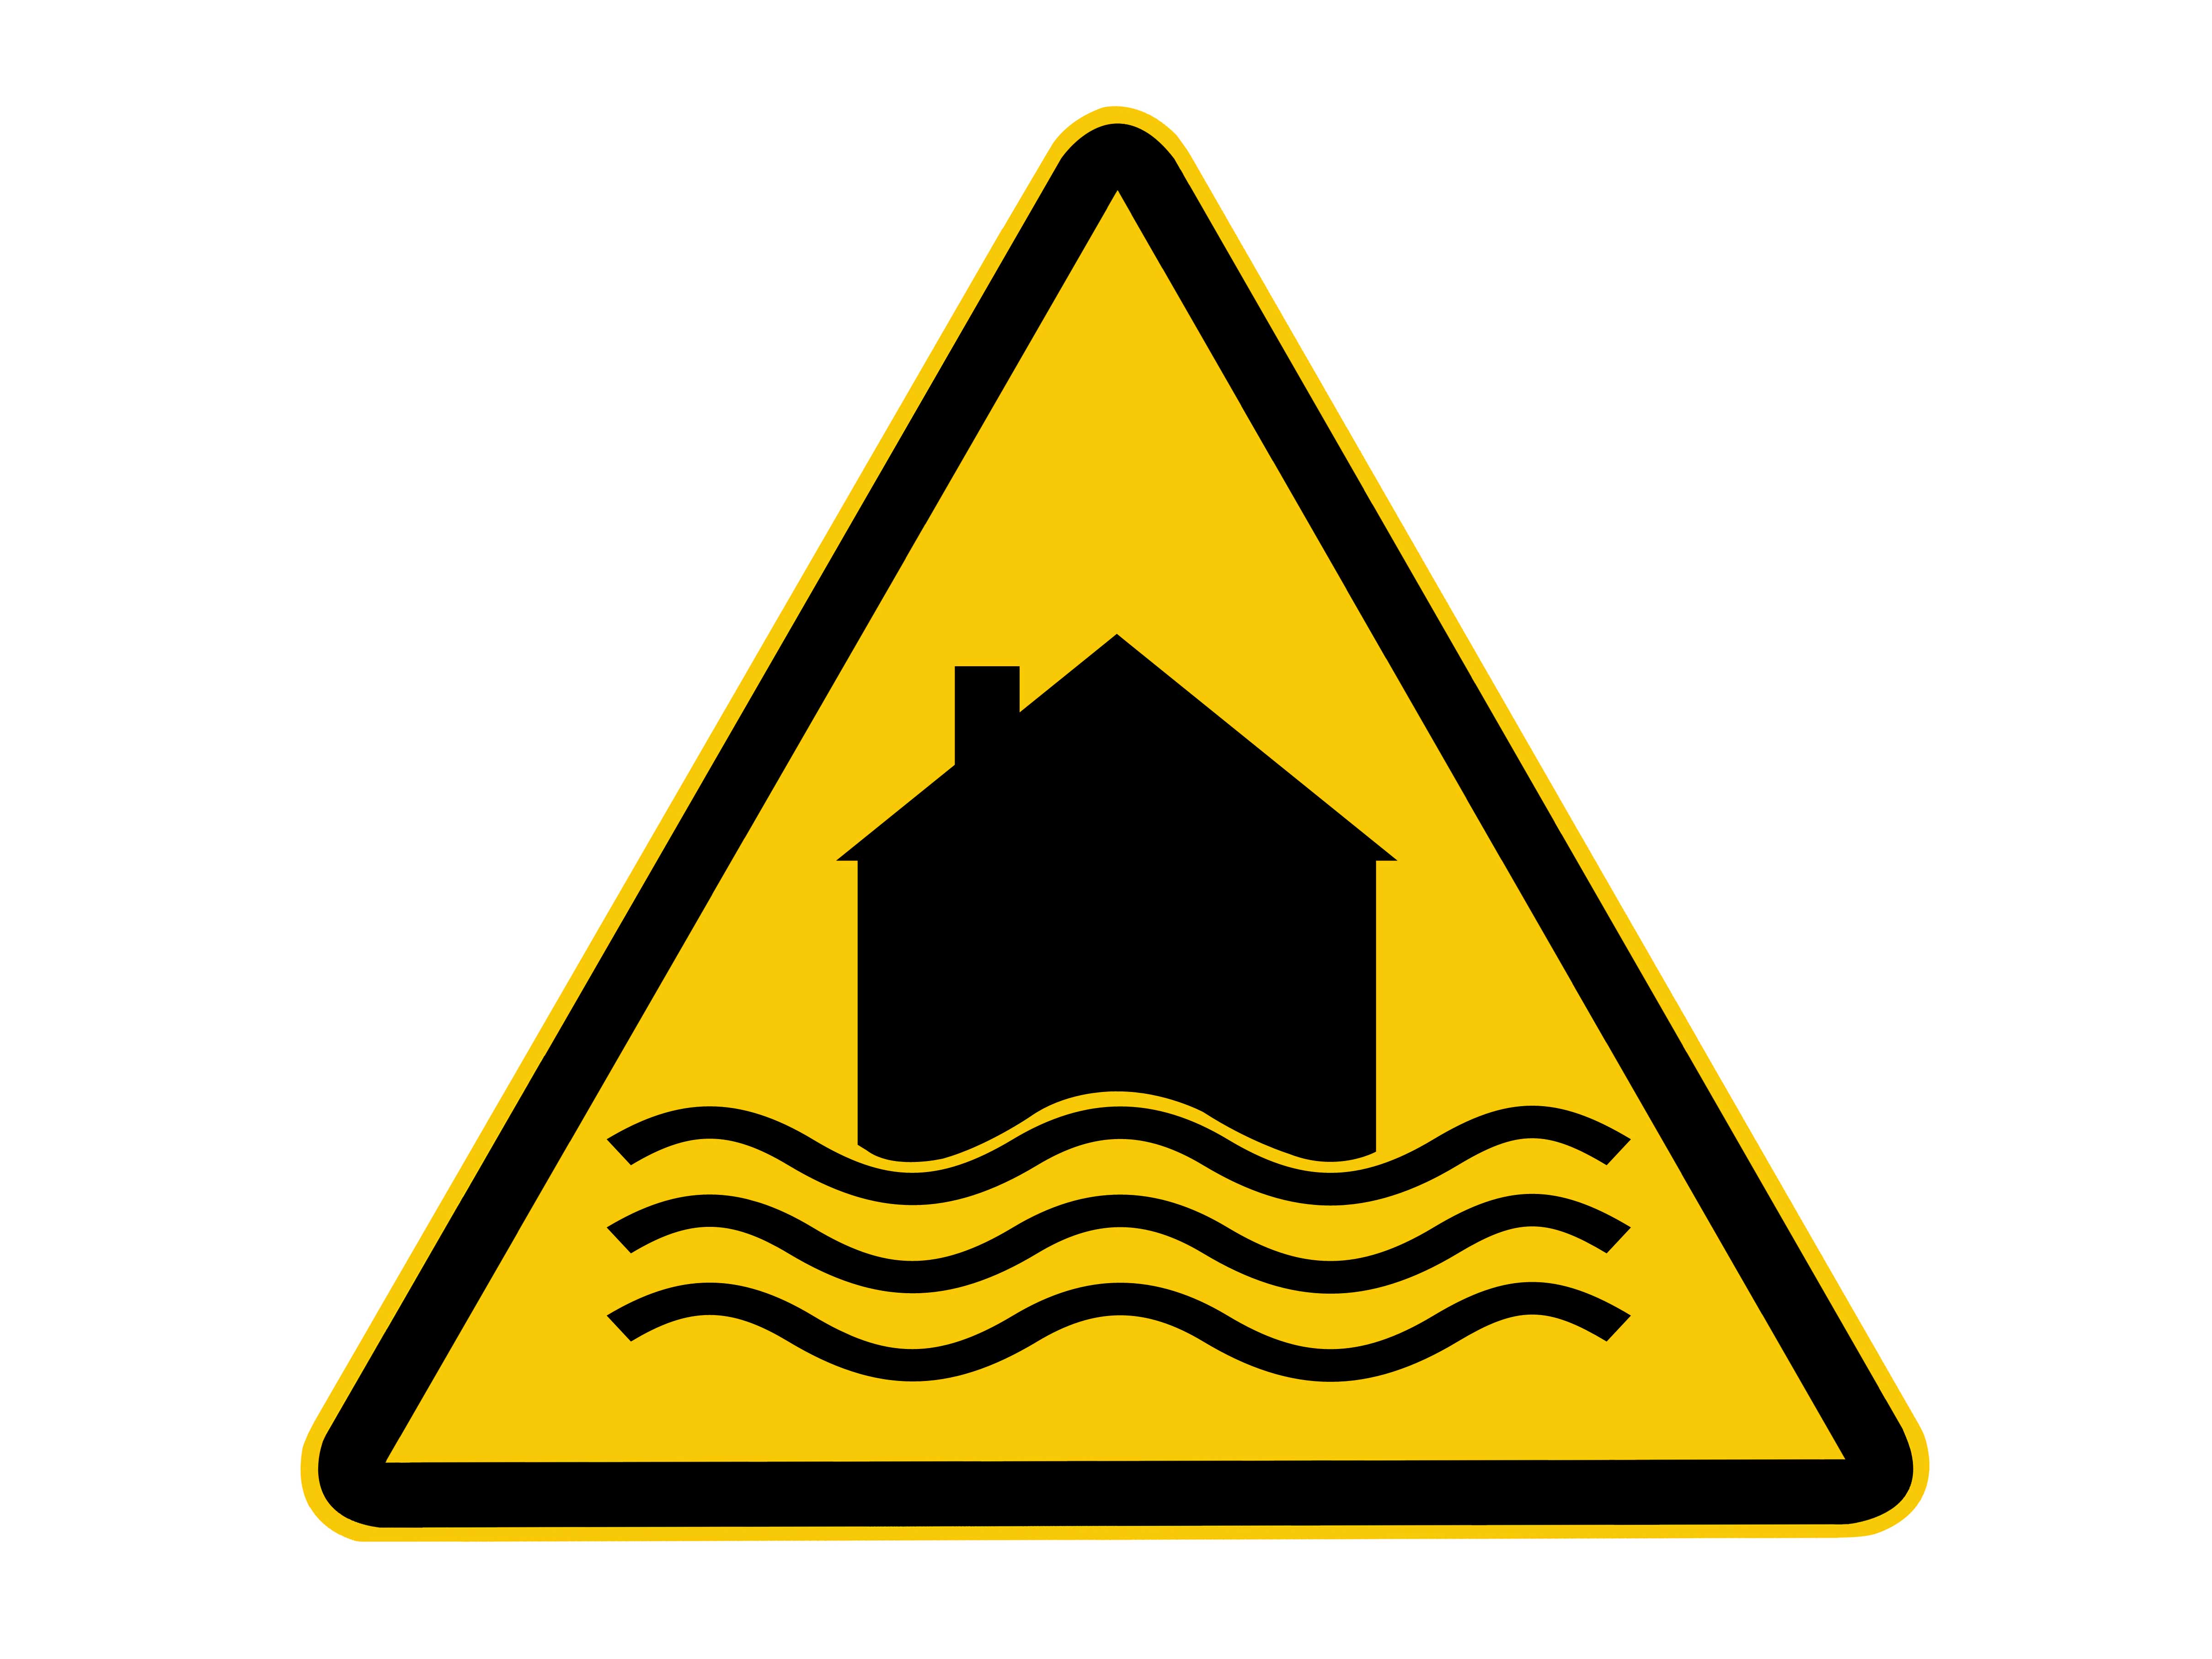 Flooding and legal liability – what are we seeing?